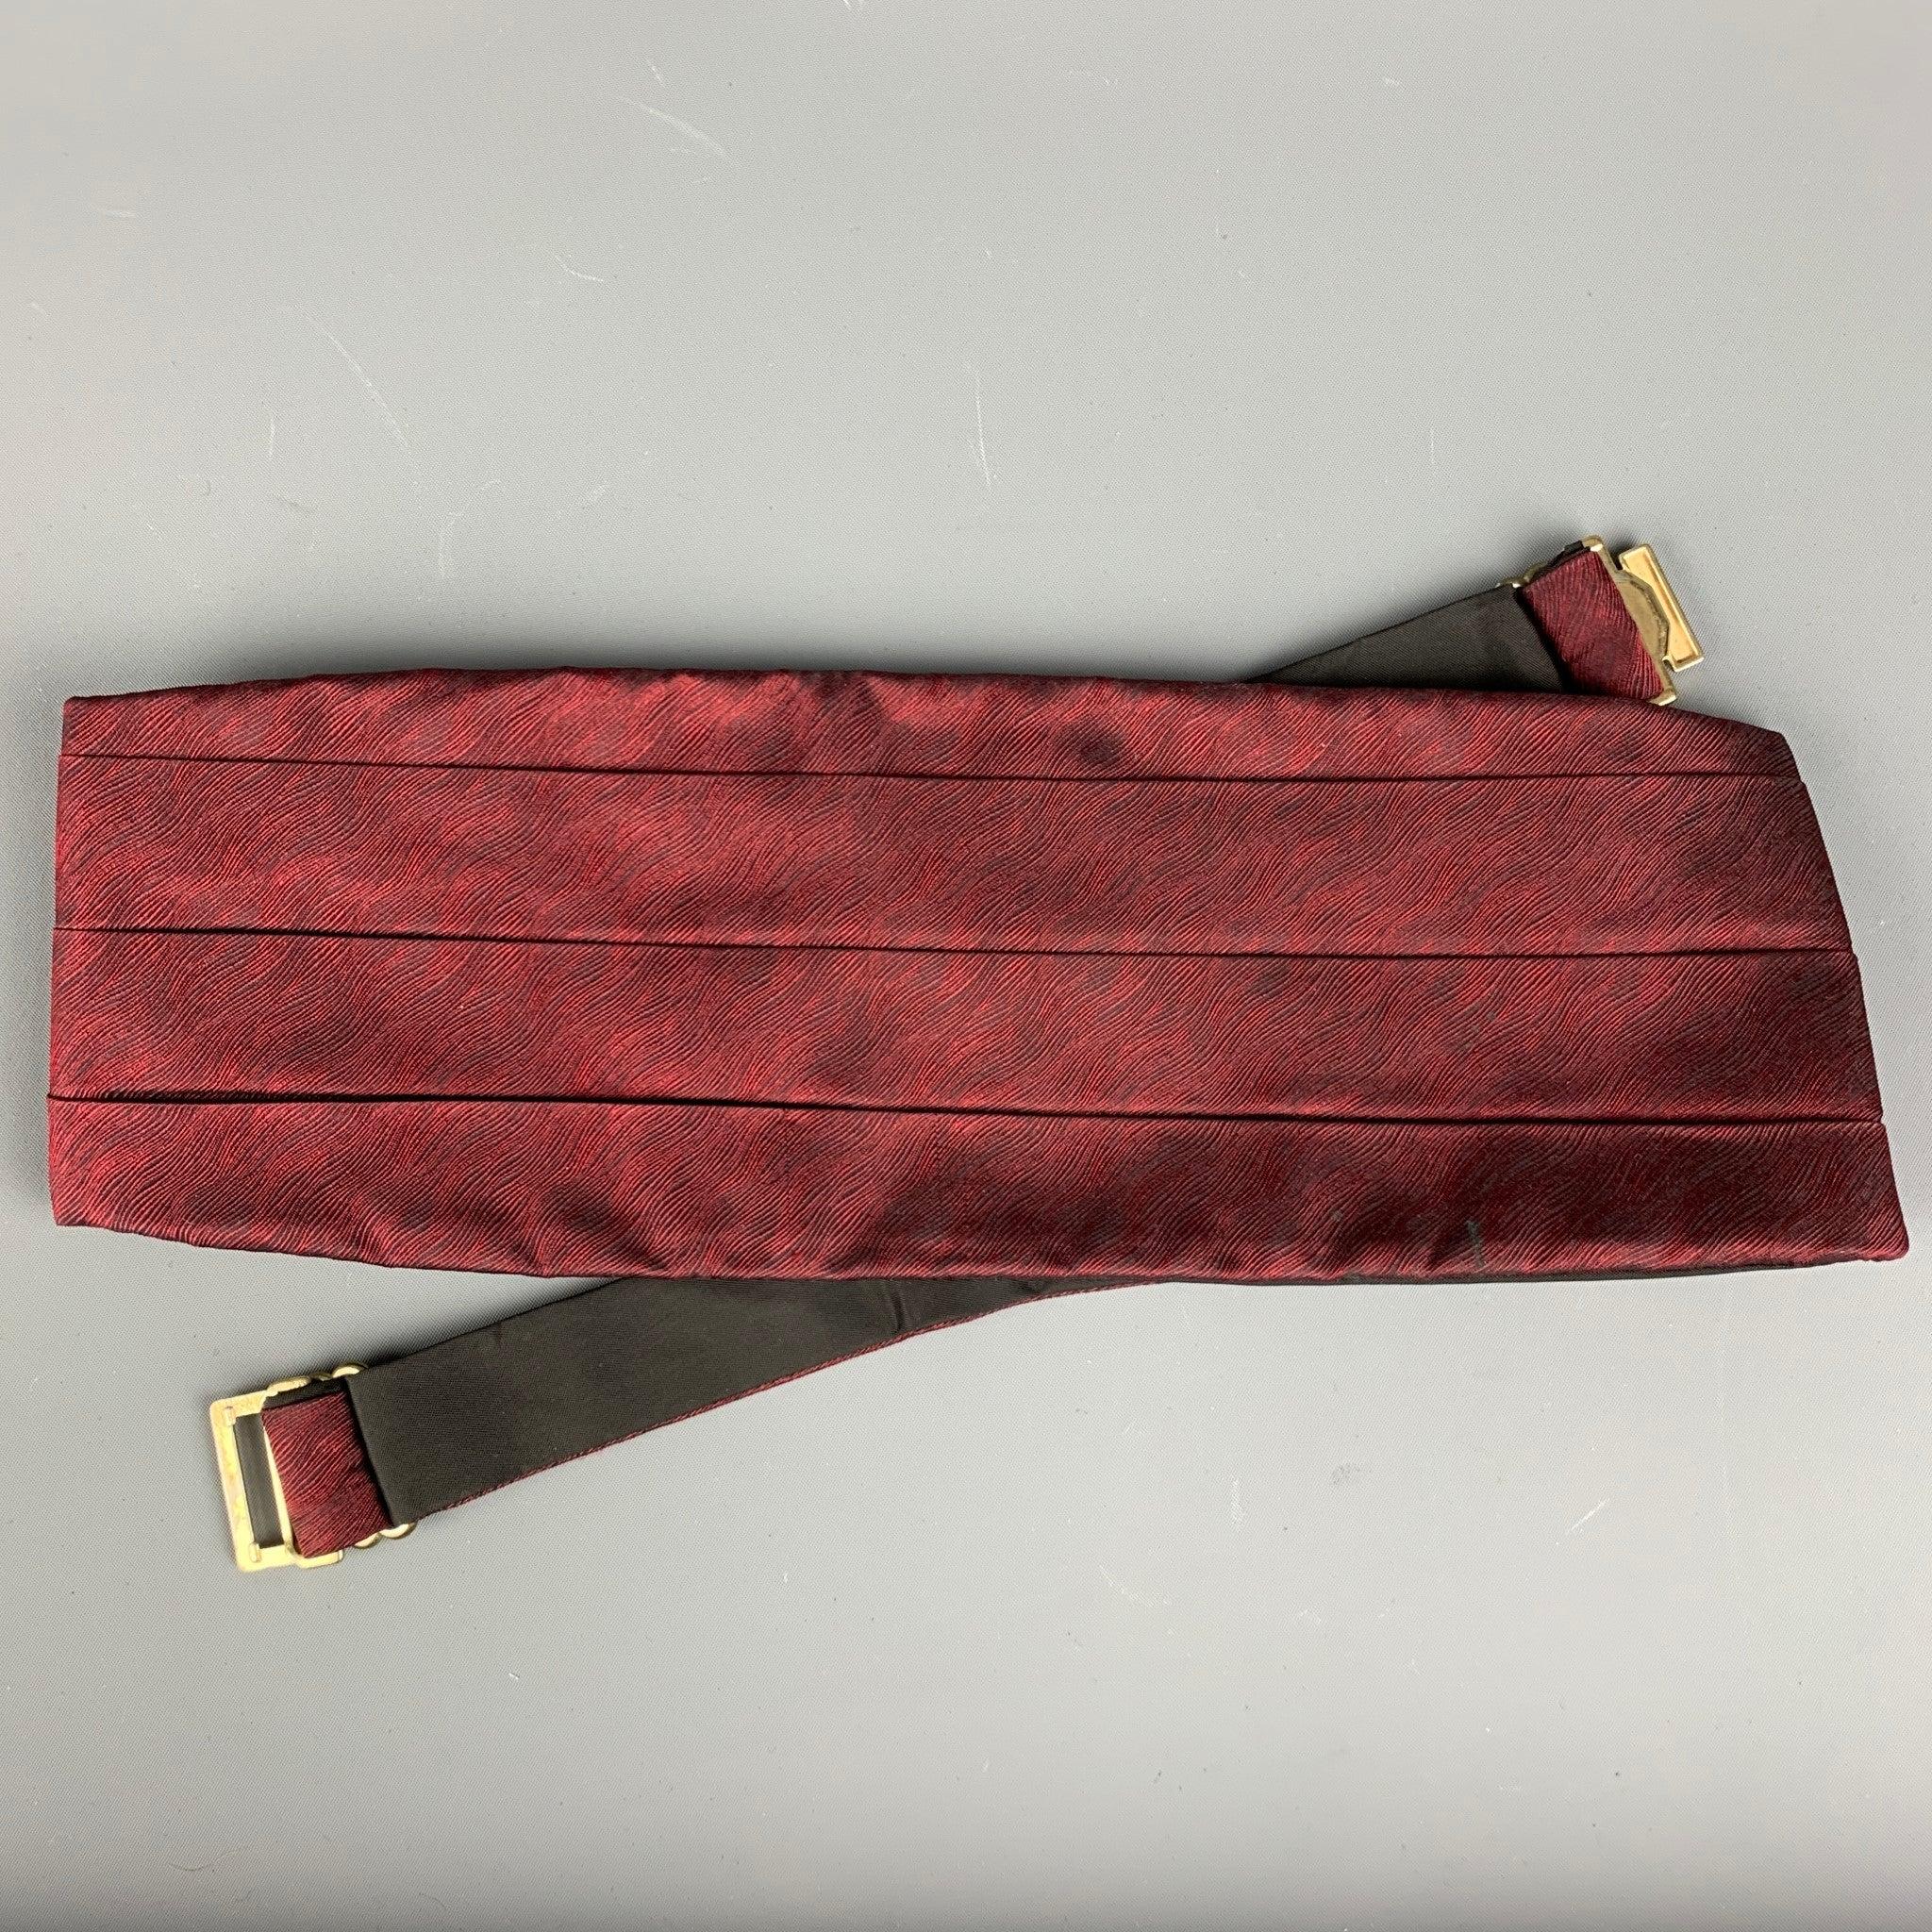 VALENTINO cummerbund in a burgundy texured silk featuring a buckle closure and matching pre-tied bow tie. Made in USA.Good Pre-Owned Condition. As is. 

Measurements: 
  - Cummerbund:Width: 4.5 inches Length: 39.75 inches  
- Bow Tie:Length: 18